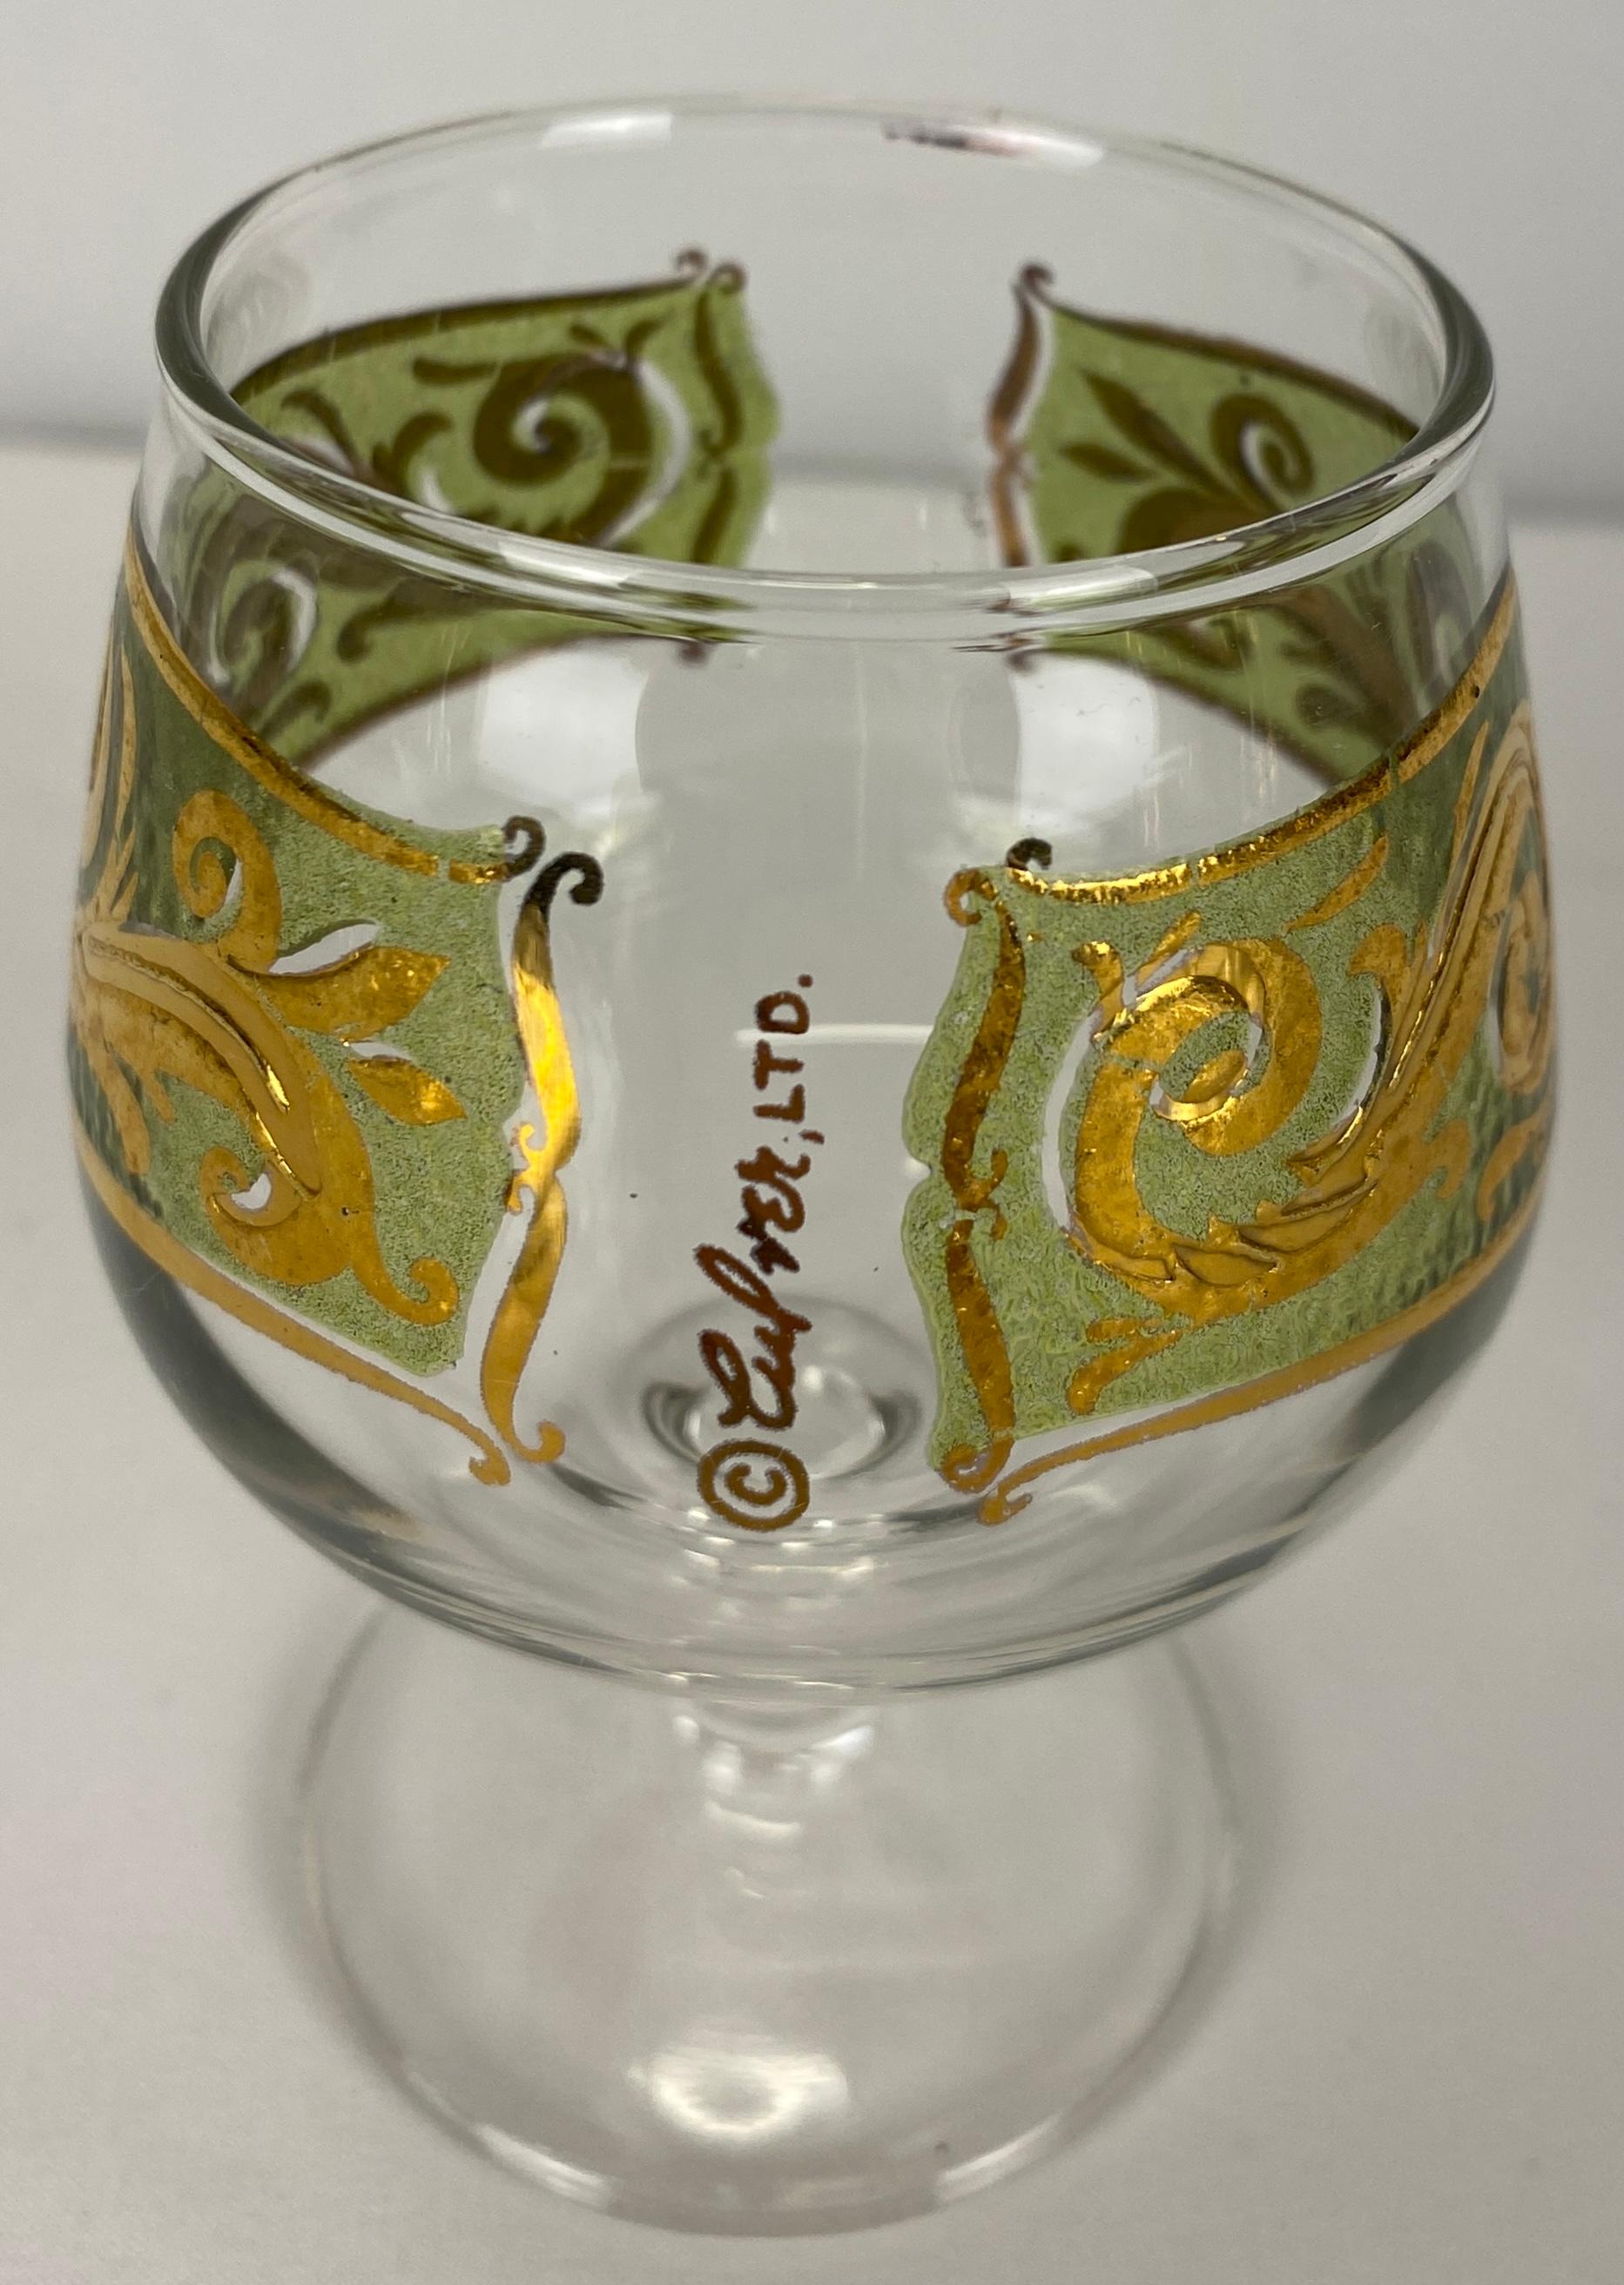 Exquisite Culver cordial glass set of 8.  Beautiful Moroccan themed design with 22-karat gold all perfect to use while serving Hors D'Oeuvres.

These highly ornate Culver cordial glasses features 22-karat gold textured filigree design with raised